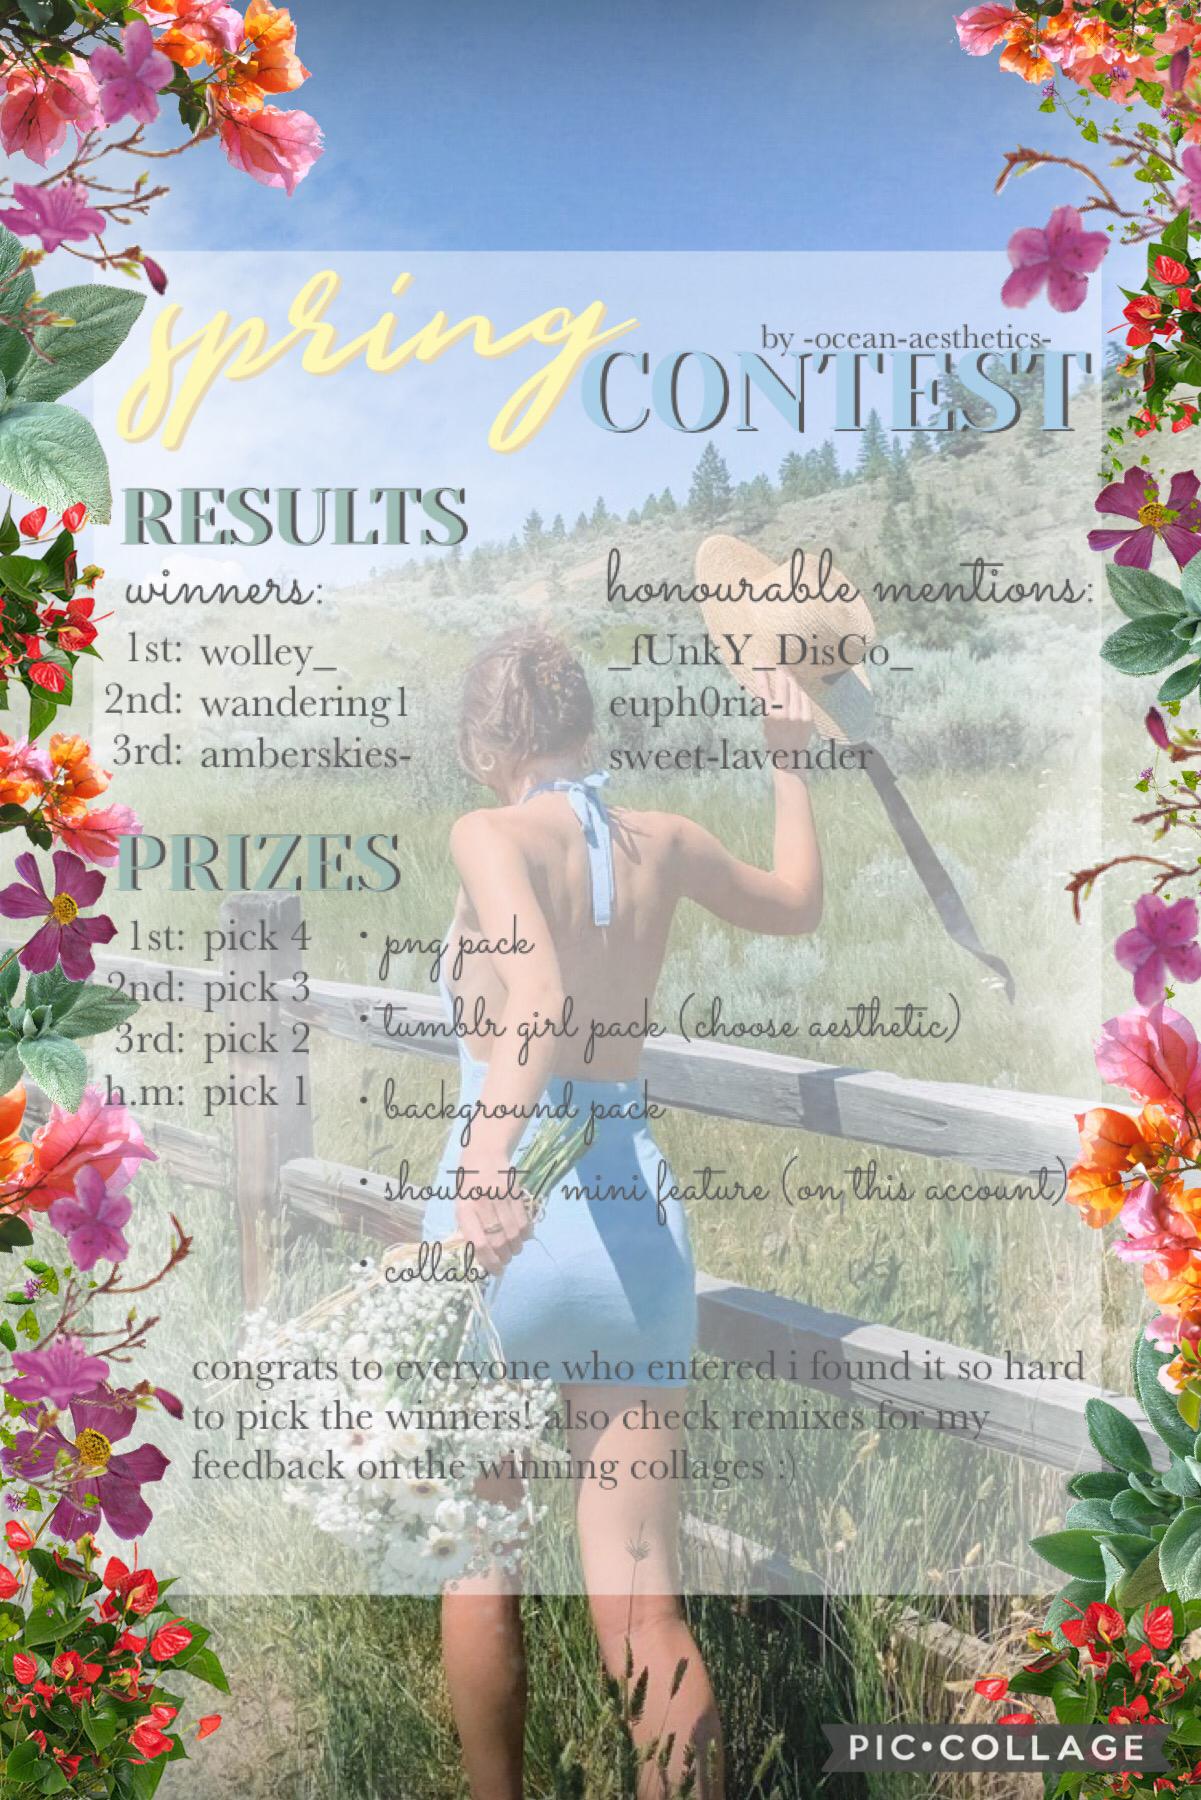 🌱-27/4/2021-🌱
i’m so so sorry this took so long i’ve been suuuper busy🙈but congrats to the winners! please check the remixes to see my feedback on the winning collages. i’ll try get prizes to you soon but collabs might be next month.